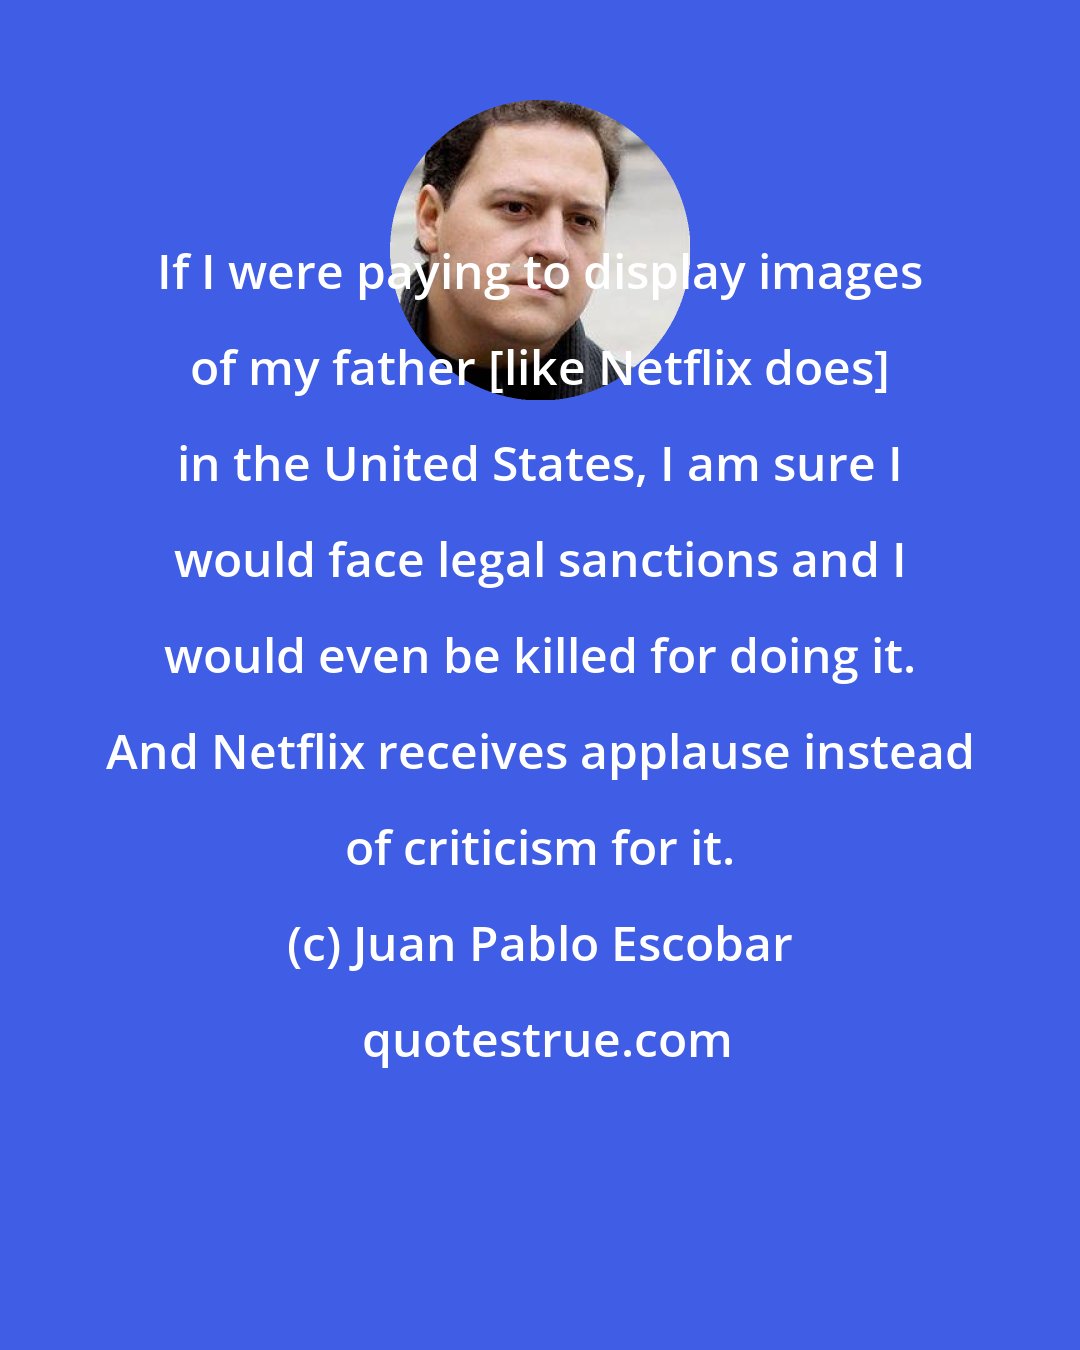 Juan Pablo Escobar: If I were paying to display images of my father [like Netflix does] in the United States, I am sure I would face legal sanctions and I would even be killed for doing it. And Netflix receives applause instead of criticism for it.